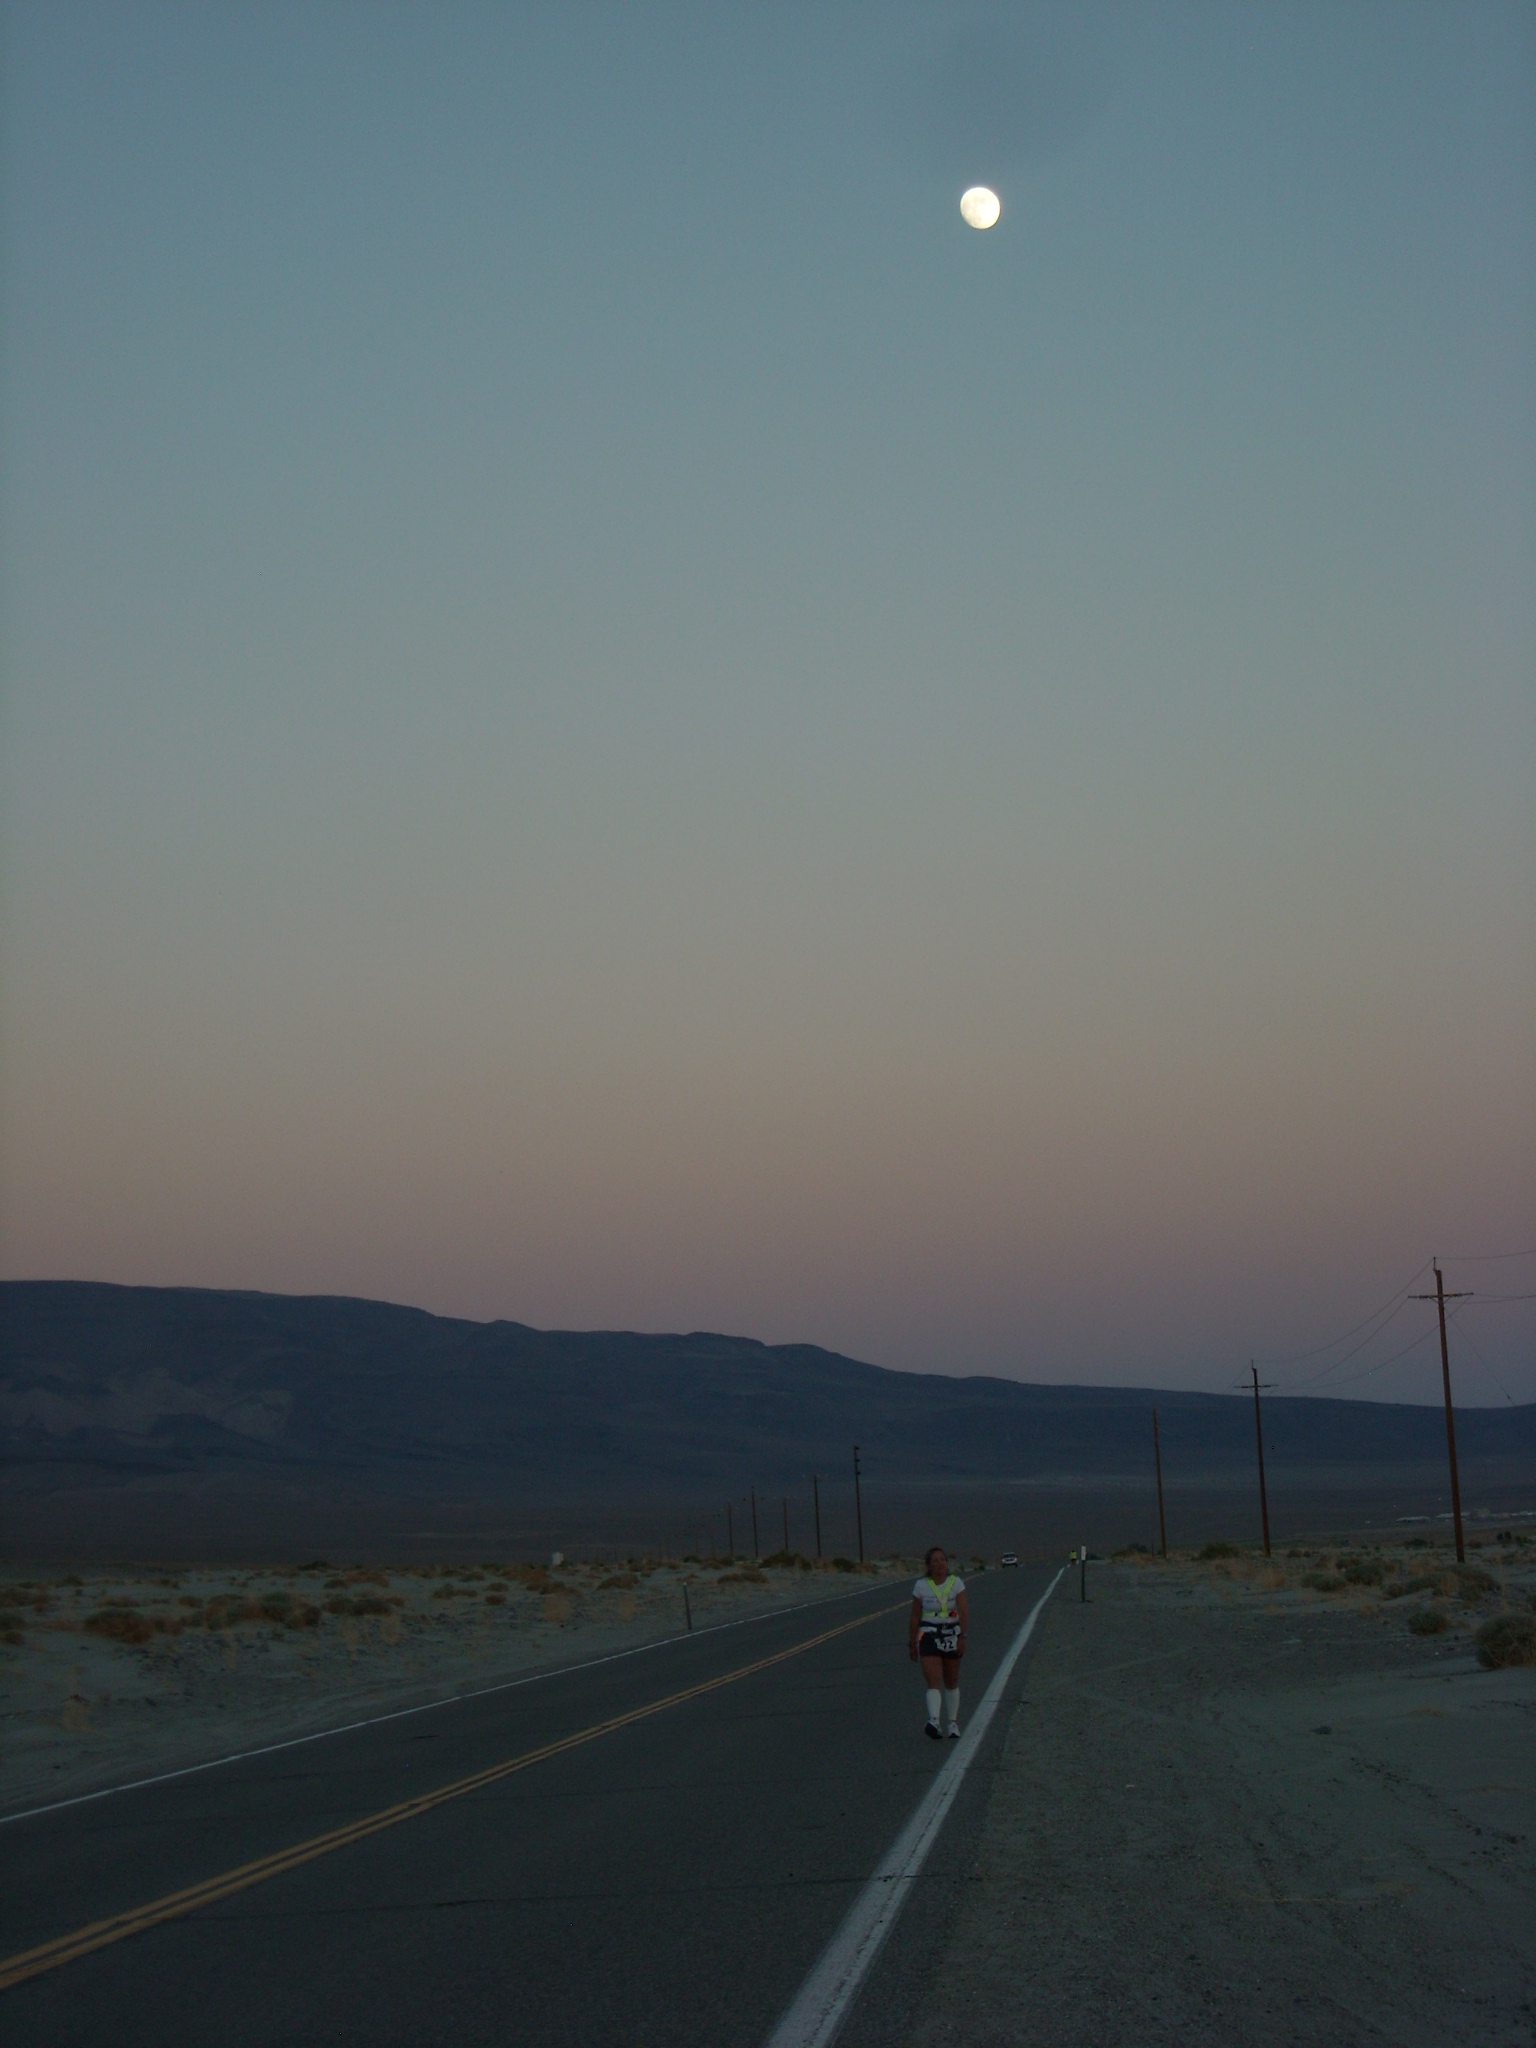 The moon was nearly full while Alene walked to Lone Pine.